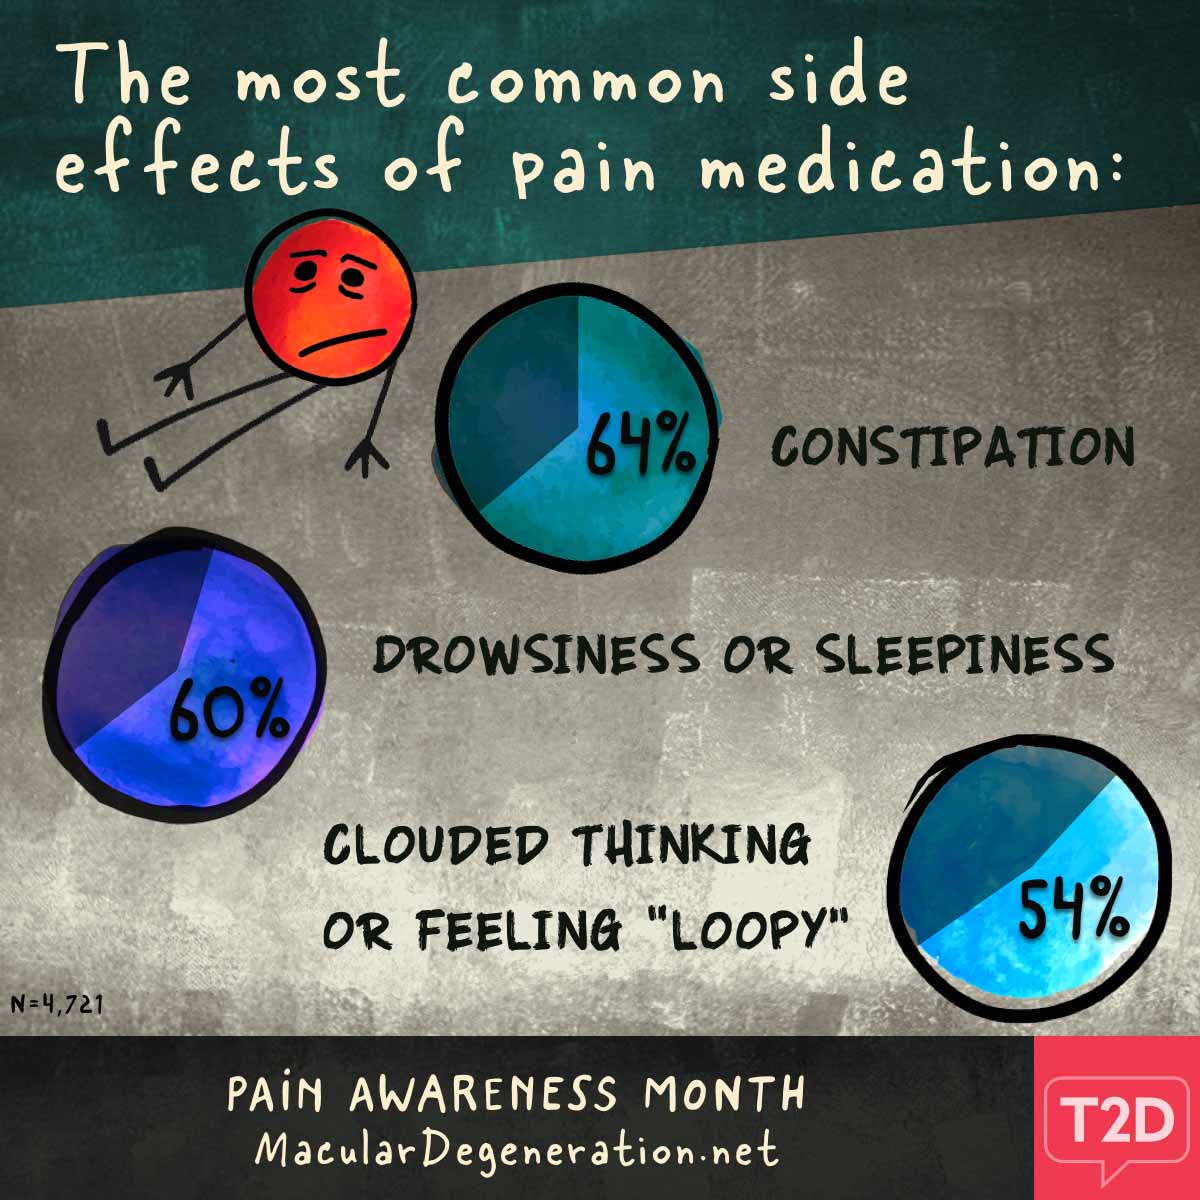 Common side effects of pain medication are constipation, drowsiness, and clouded thinking